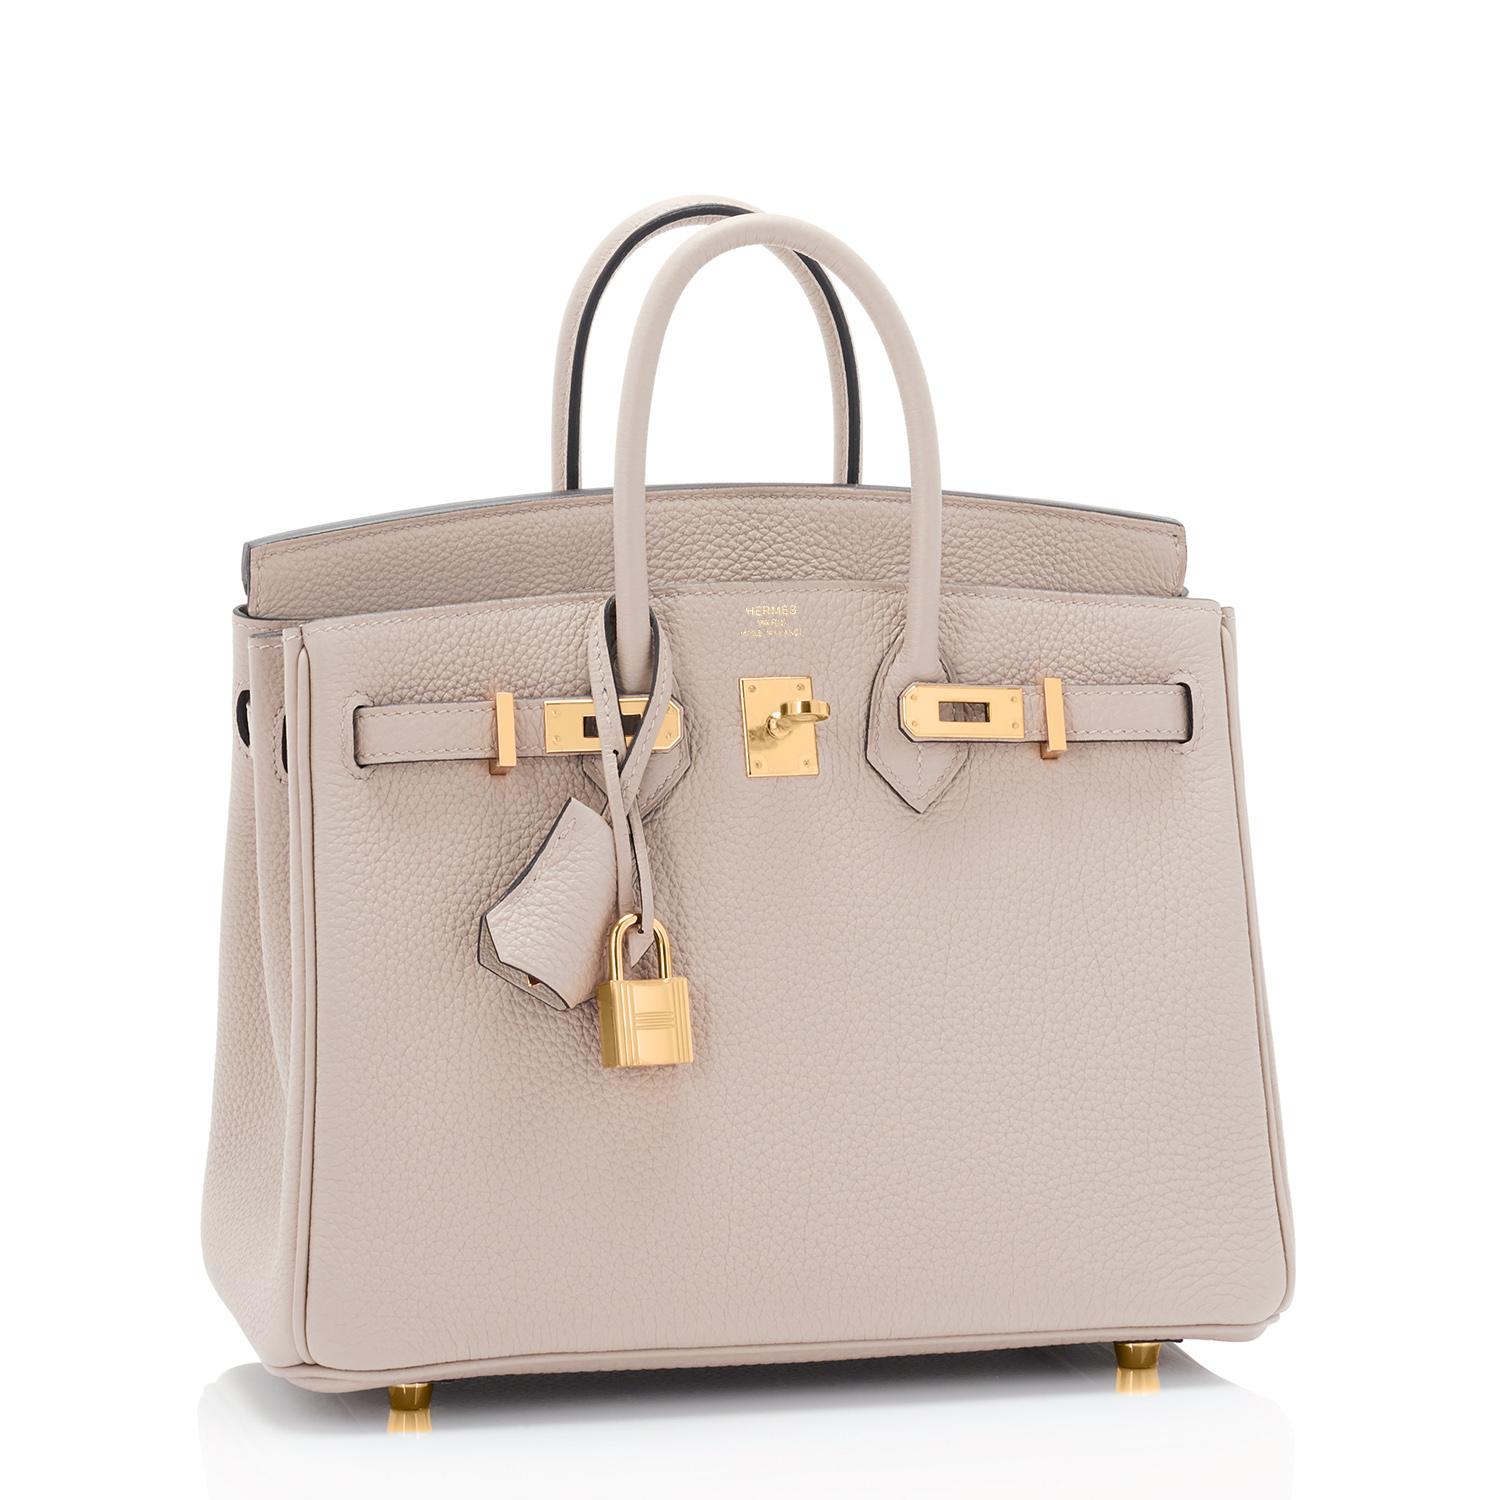 Hermes Birkin 25cm Gris Tourterelle Togo Bag Gold Hardware NEW RARE
Long discontinued from production, most coveted combination- do not miss!
New or Never Worn in Pristine Condition (with plastic on hardware) 
Perfect gift! Comes full set with keys,